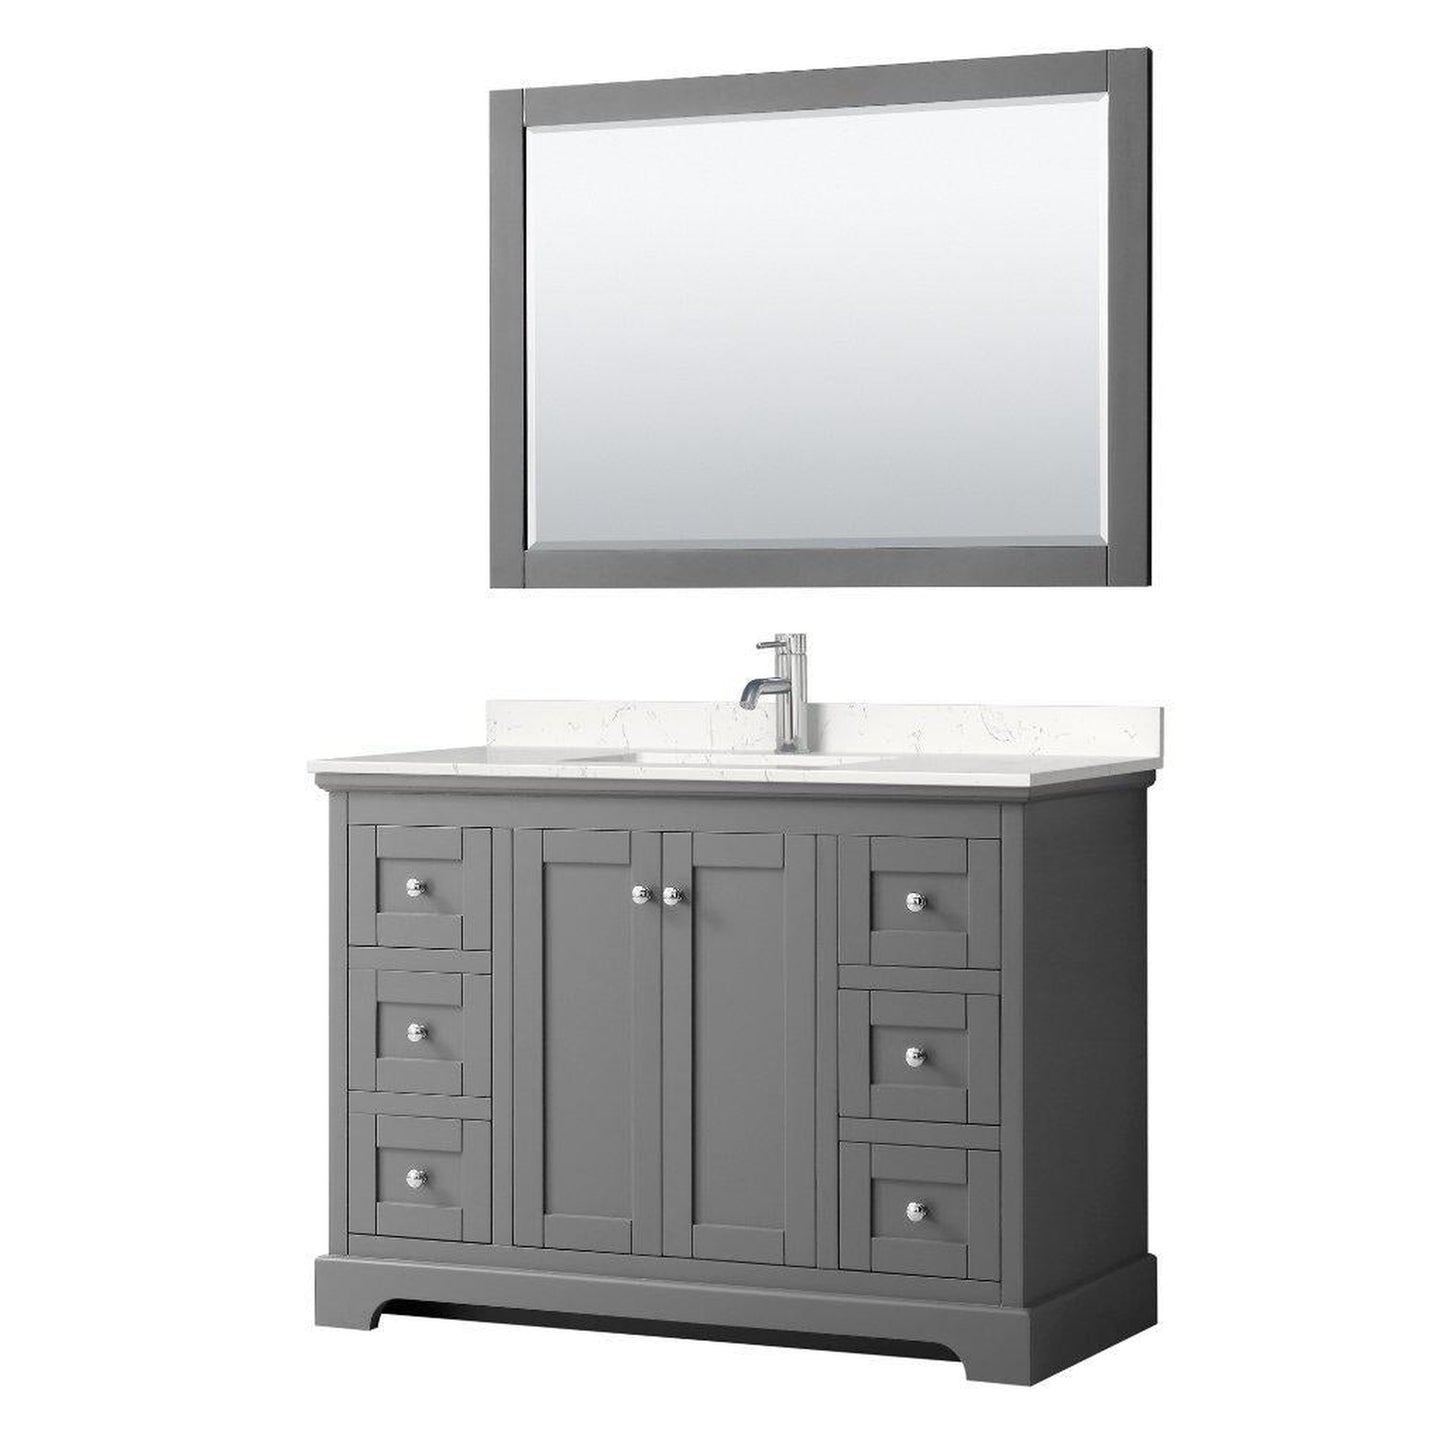 Wyndham Collection Avery 48" Dark Gray Single Bathroom Vanity Set With Light-Vein Cultured Marble Countertop With 1-Hole Faucet And Square Sink And 46" Mirror